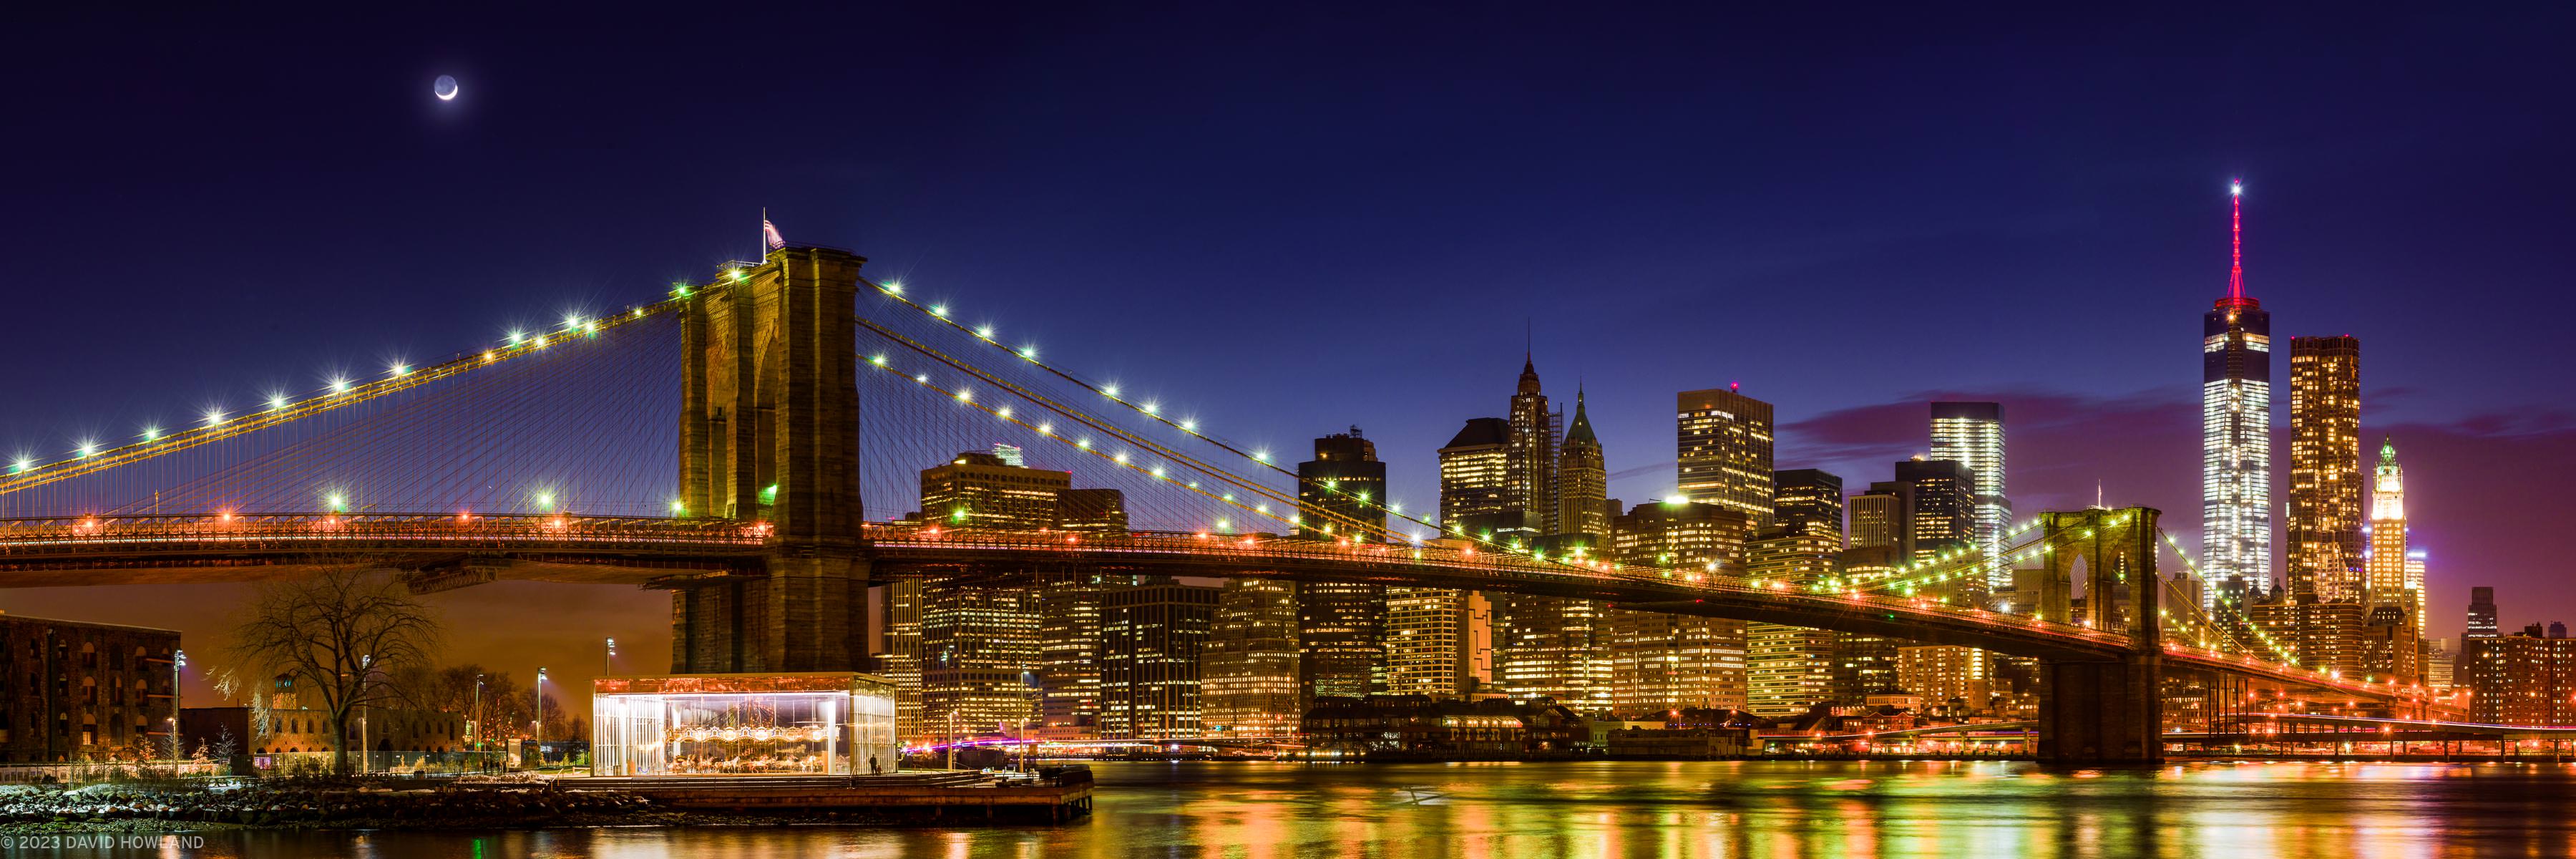 A panorama photo of a crescent moon rising over the Brooklyn Bridge and illuminated skyscrapers of downtown New Yok City at night.